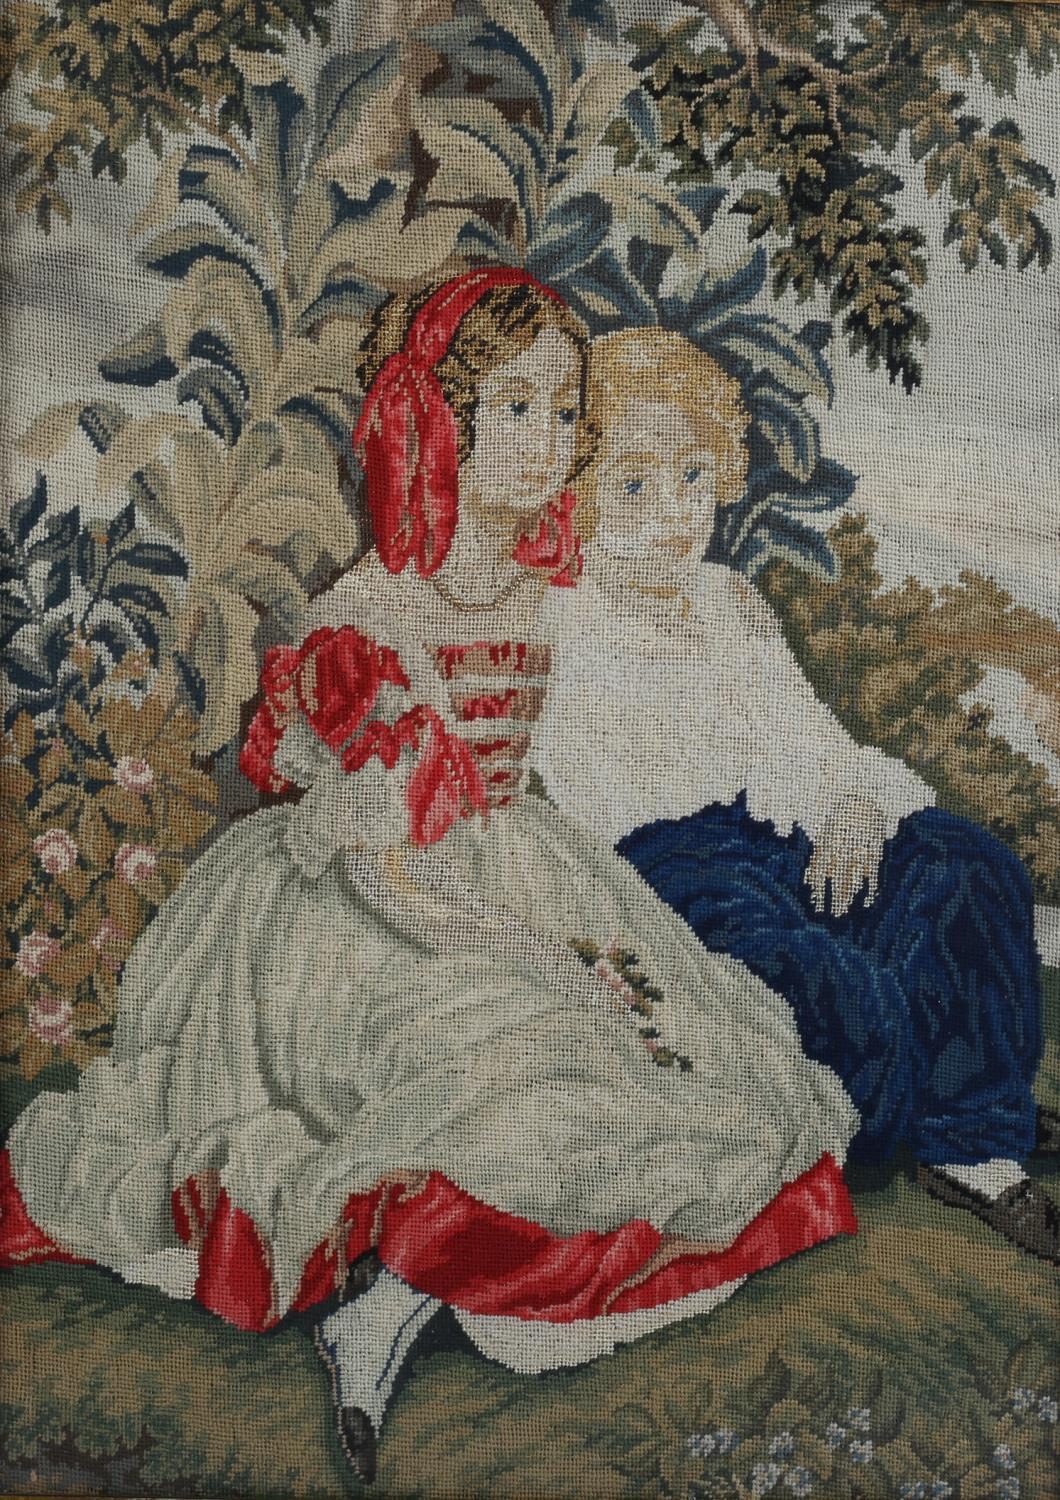 A 19TH CENTURY PETIT GROS NEEDLEWORK PANEL worked in coloured silks with a boy and girl sitting in a - Image 2 of 4